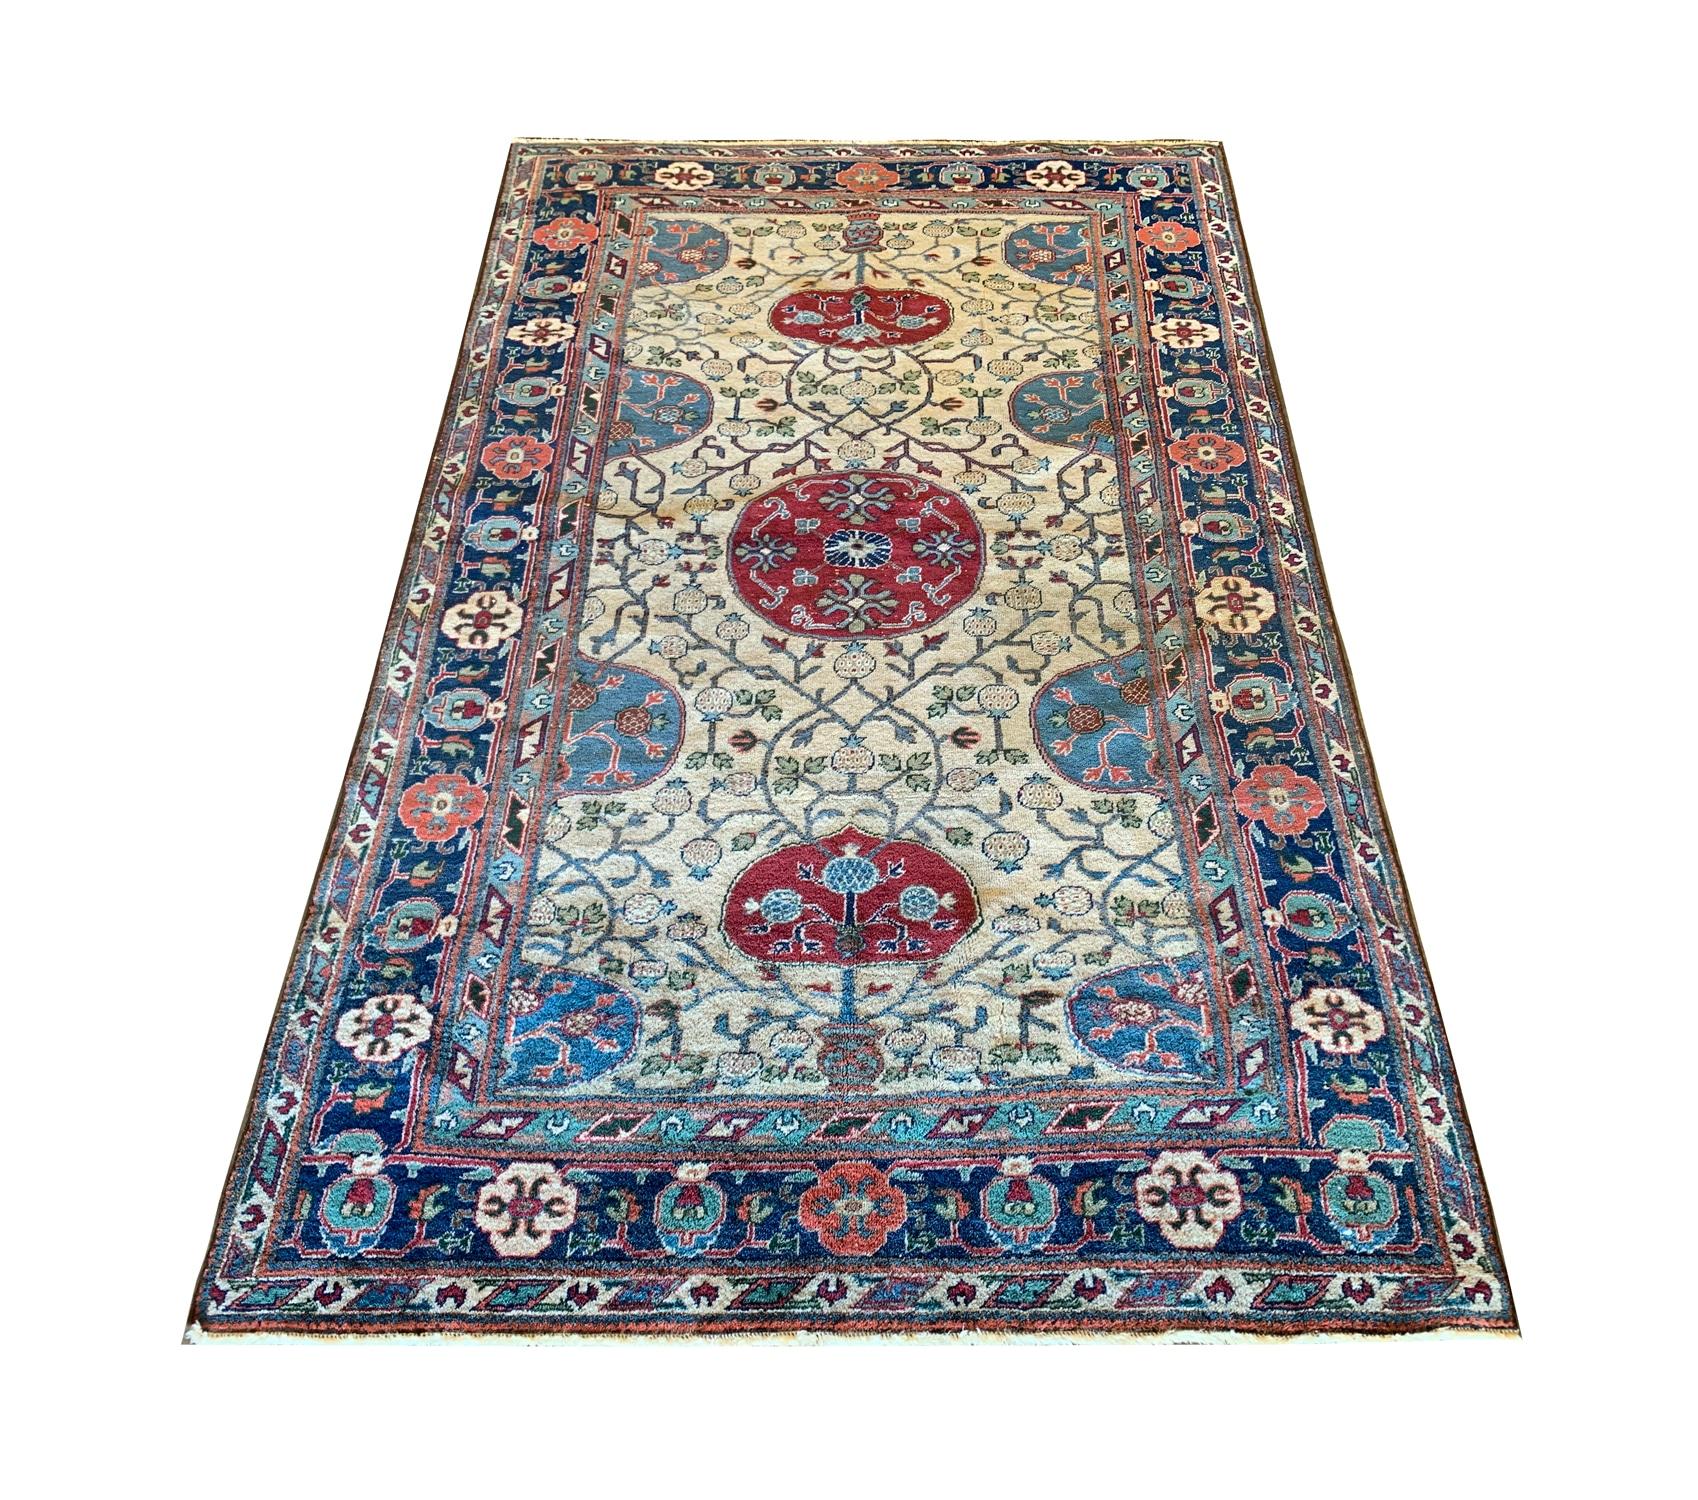 This exceptional antique collectible khotan rug from Turkestan, Central Asia, dates back to the 1880s. Crafted with meticulous care through hand-knotting techniques, this vintage rug boasts an exquisite blend of history and artistry. Its condition